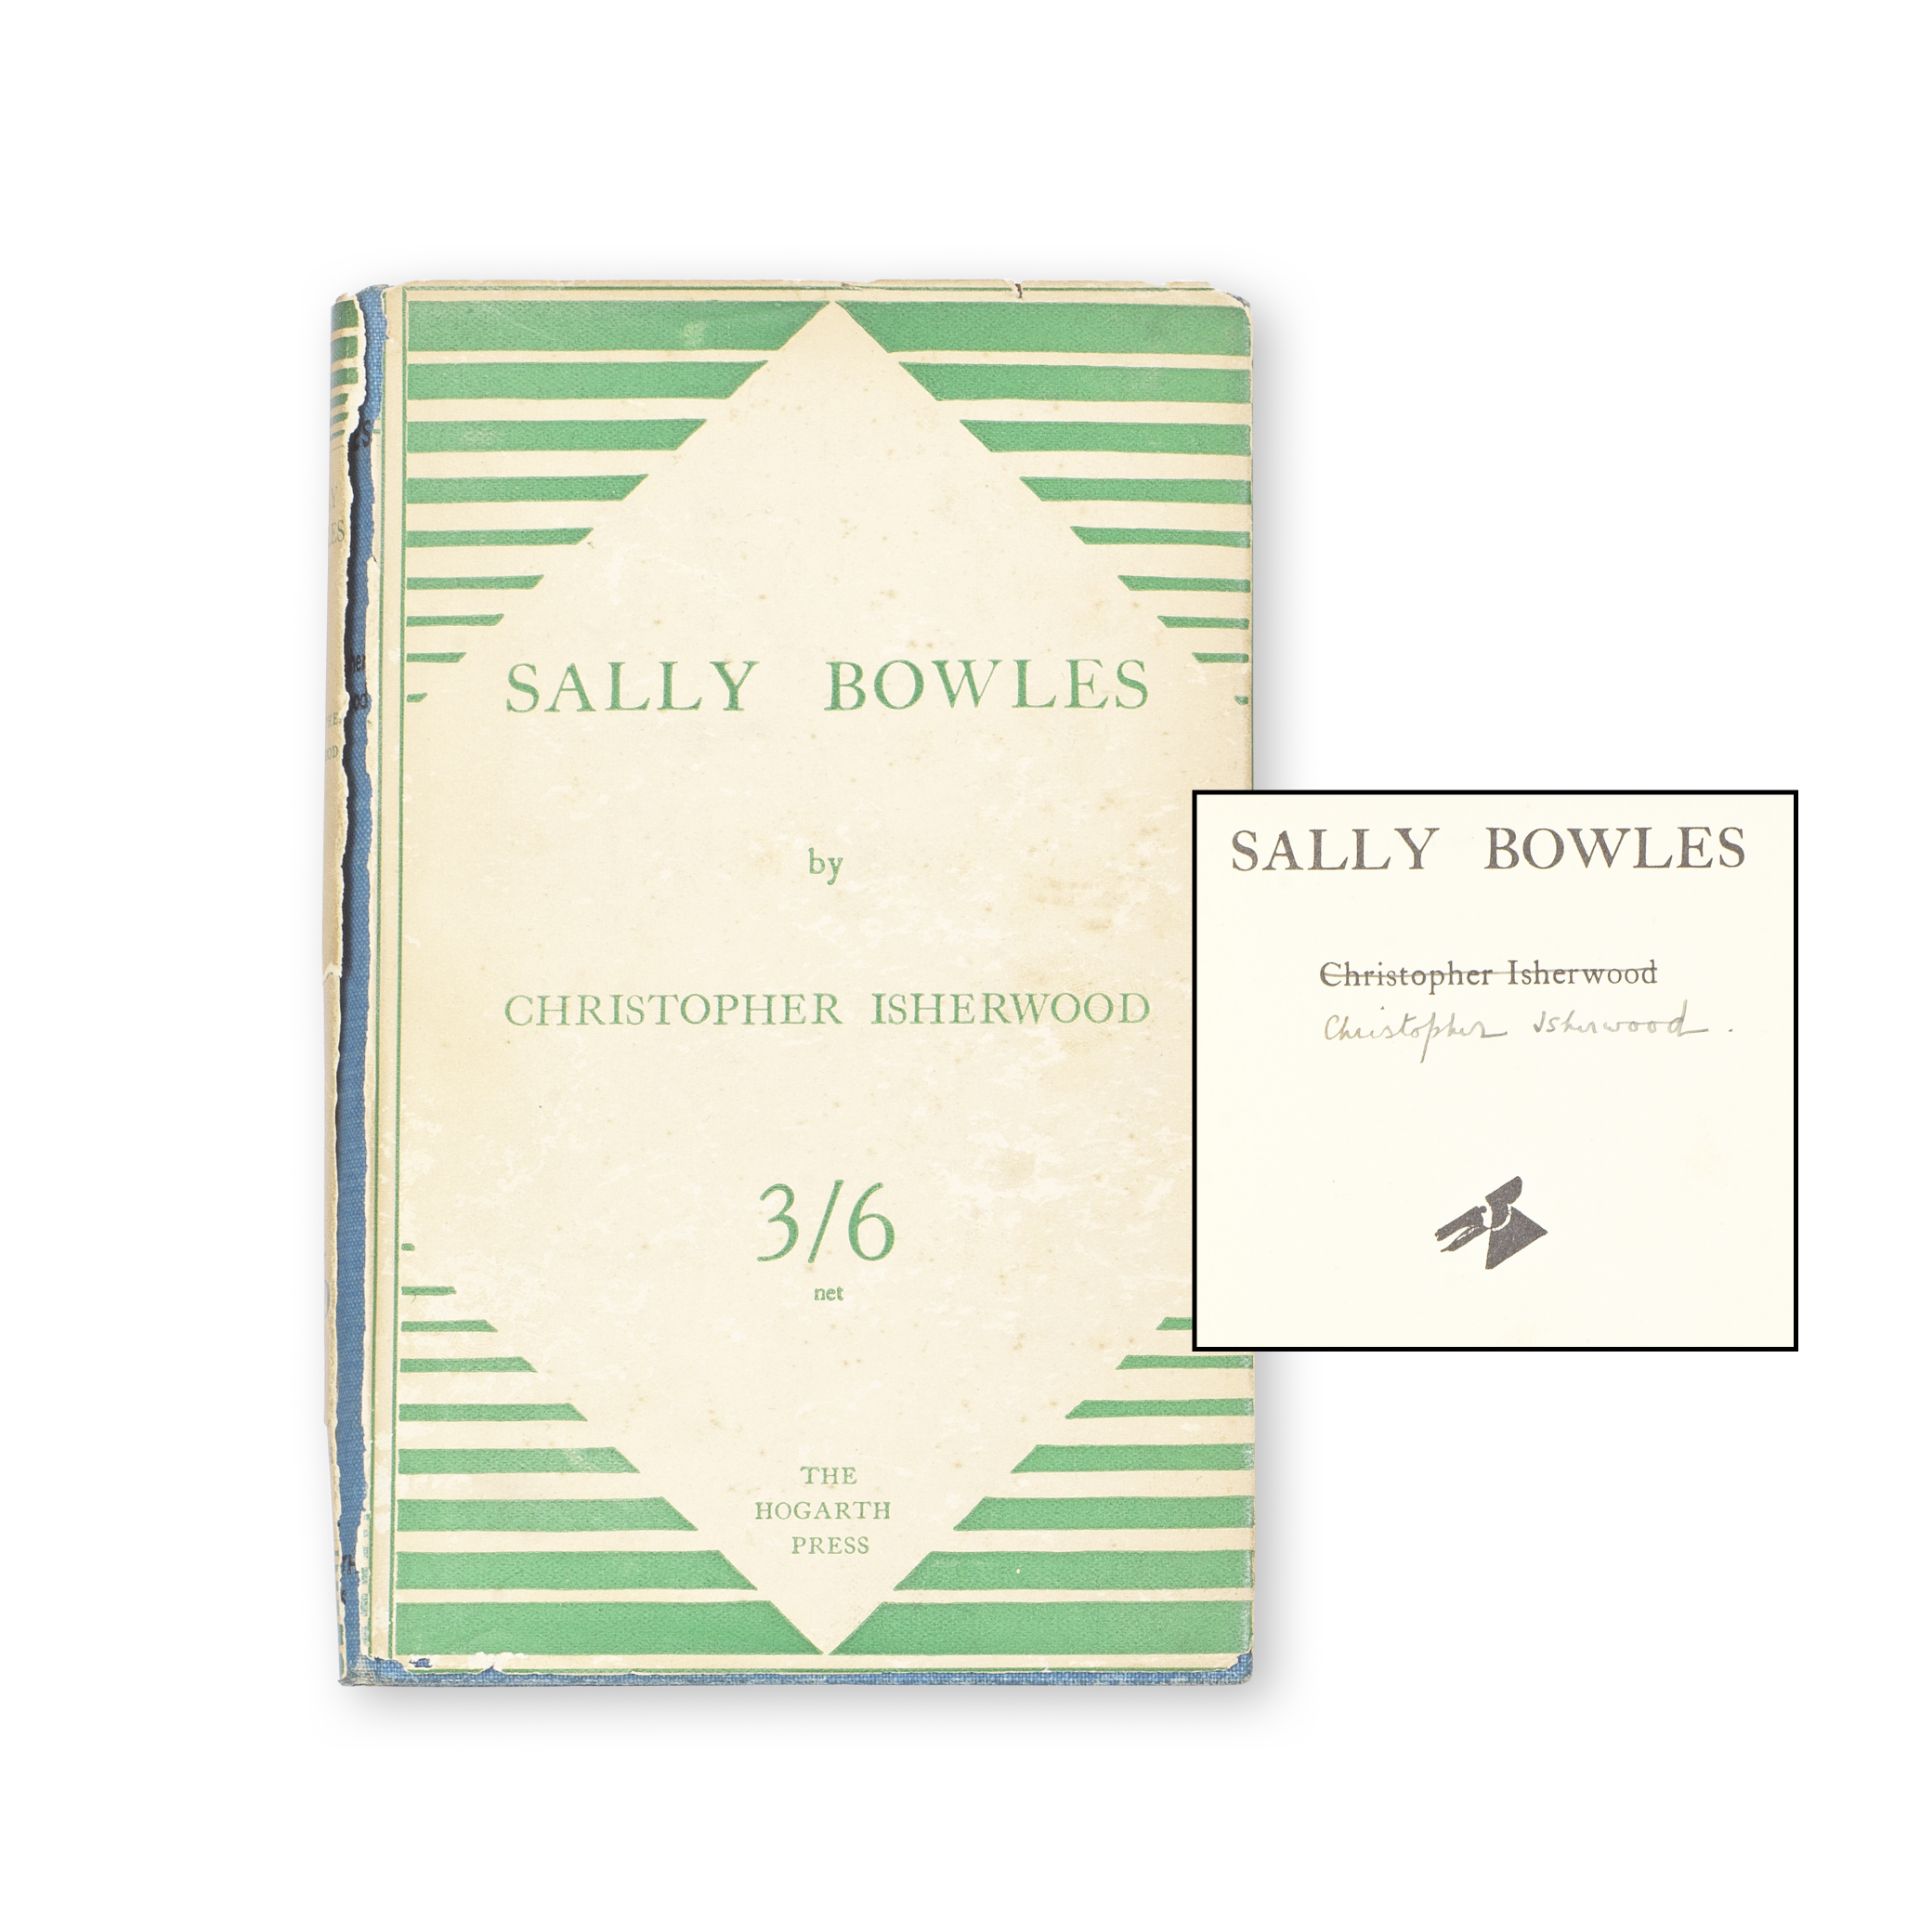 ISHERWOOD (CHRISTOPHER) Sally Bowles, FIRST EDITION, SIGNED BY THE AUTHOR on the title-page (cro...